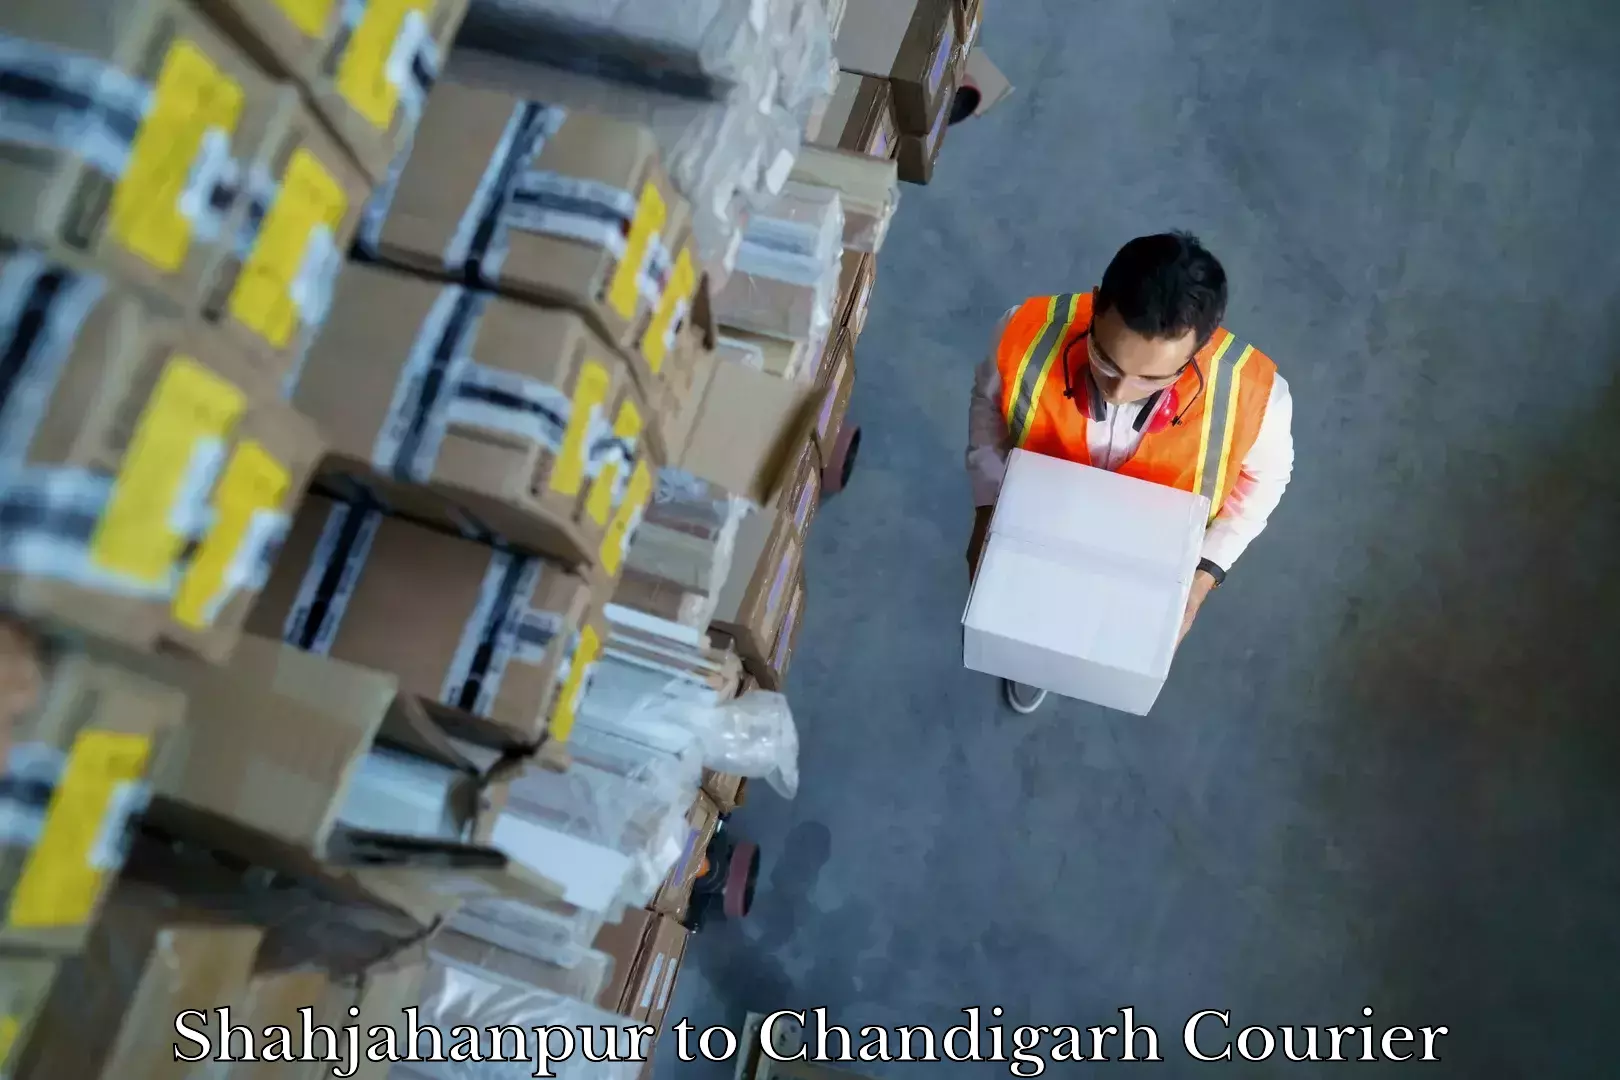 Trusted relocation experts Shahjahanpur to Chandigarh